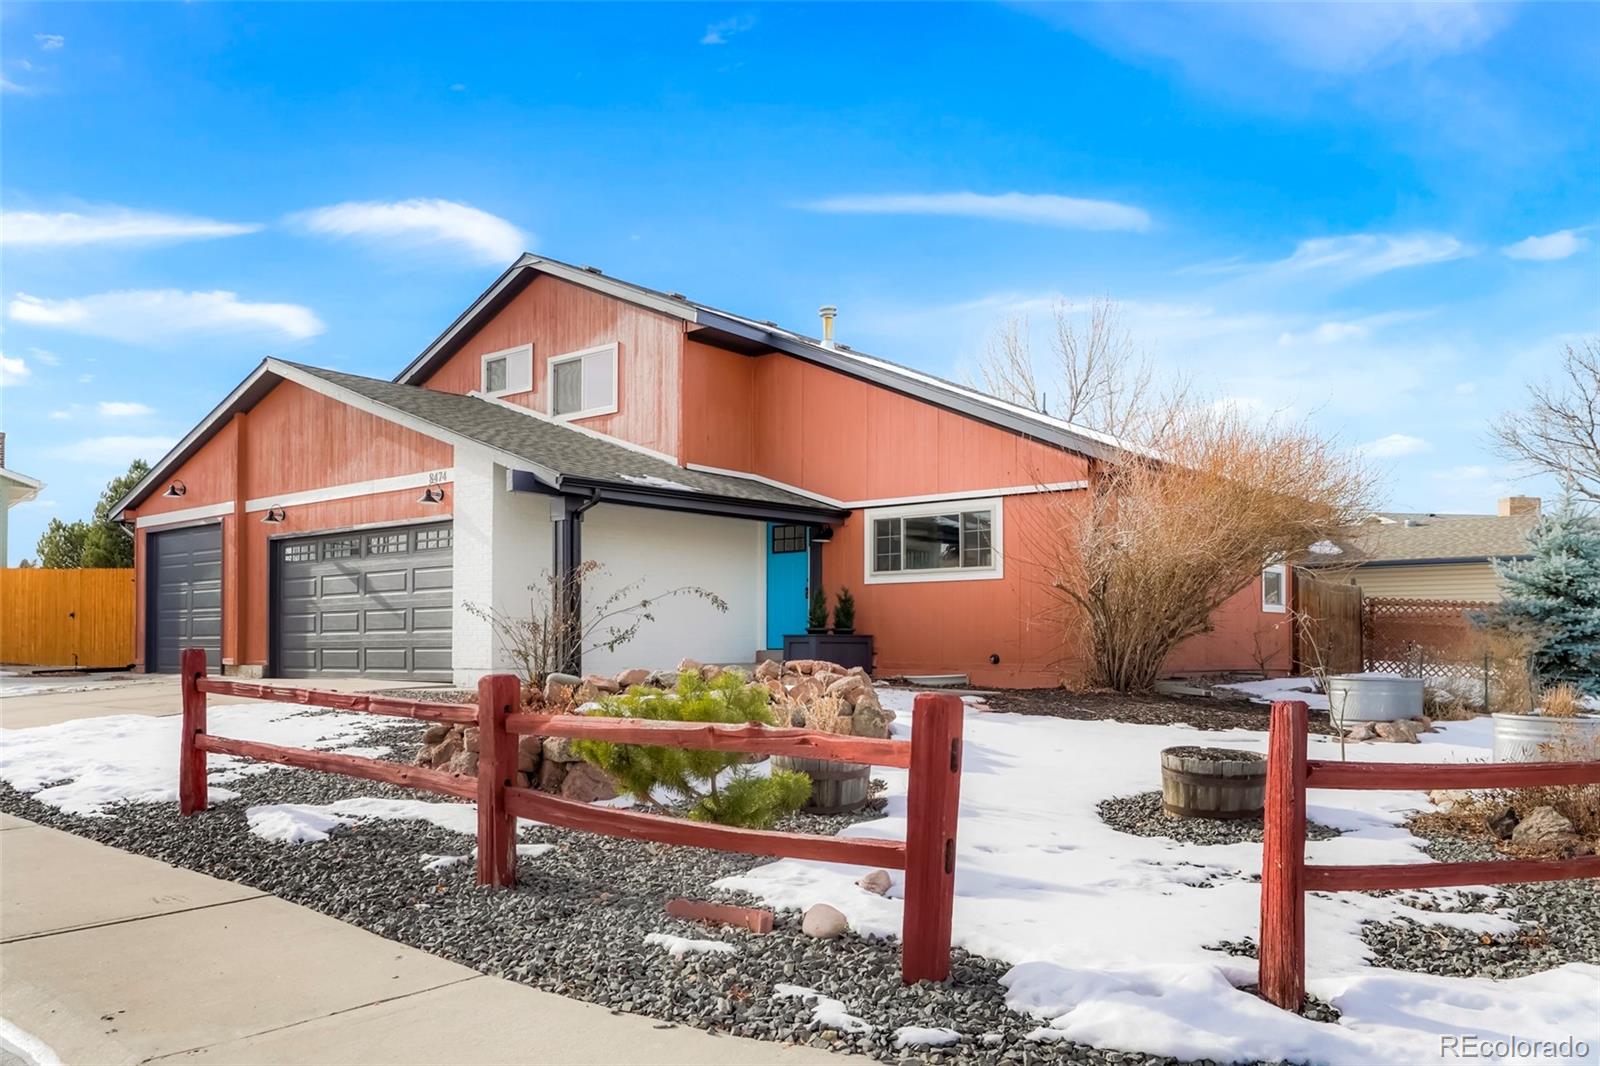 sell my home arvada